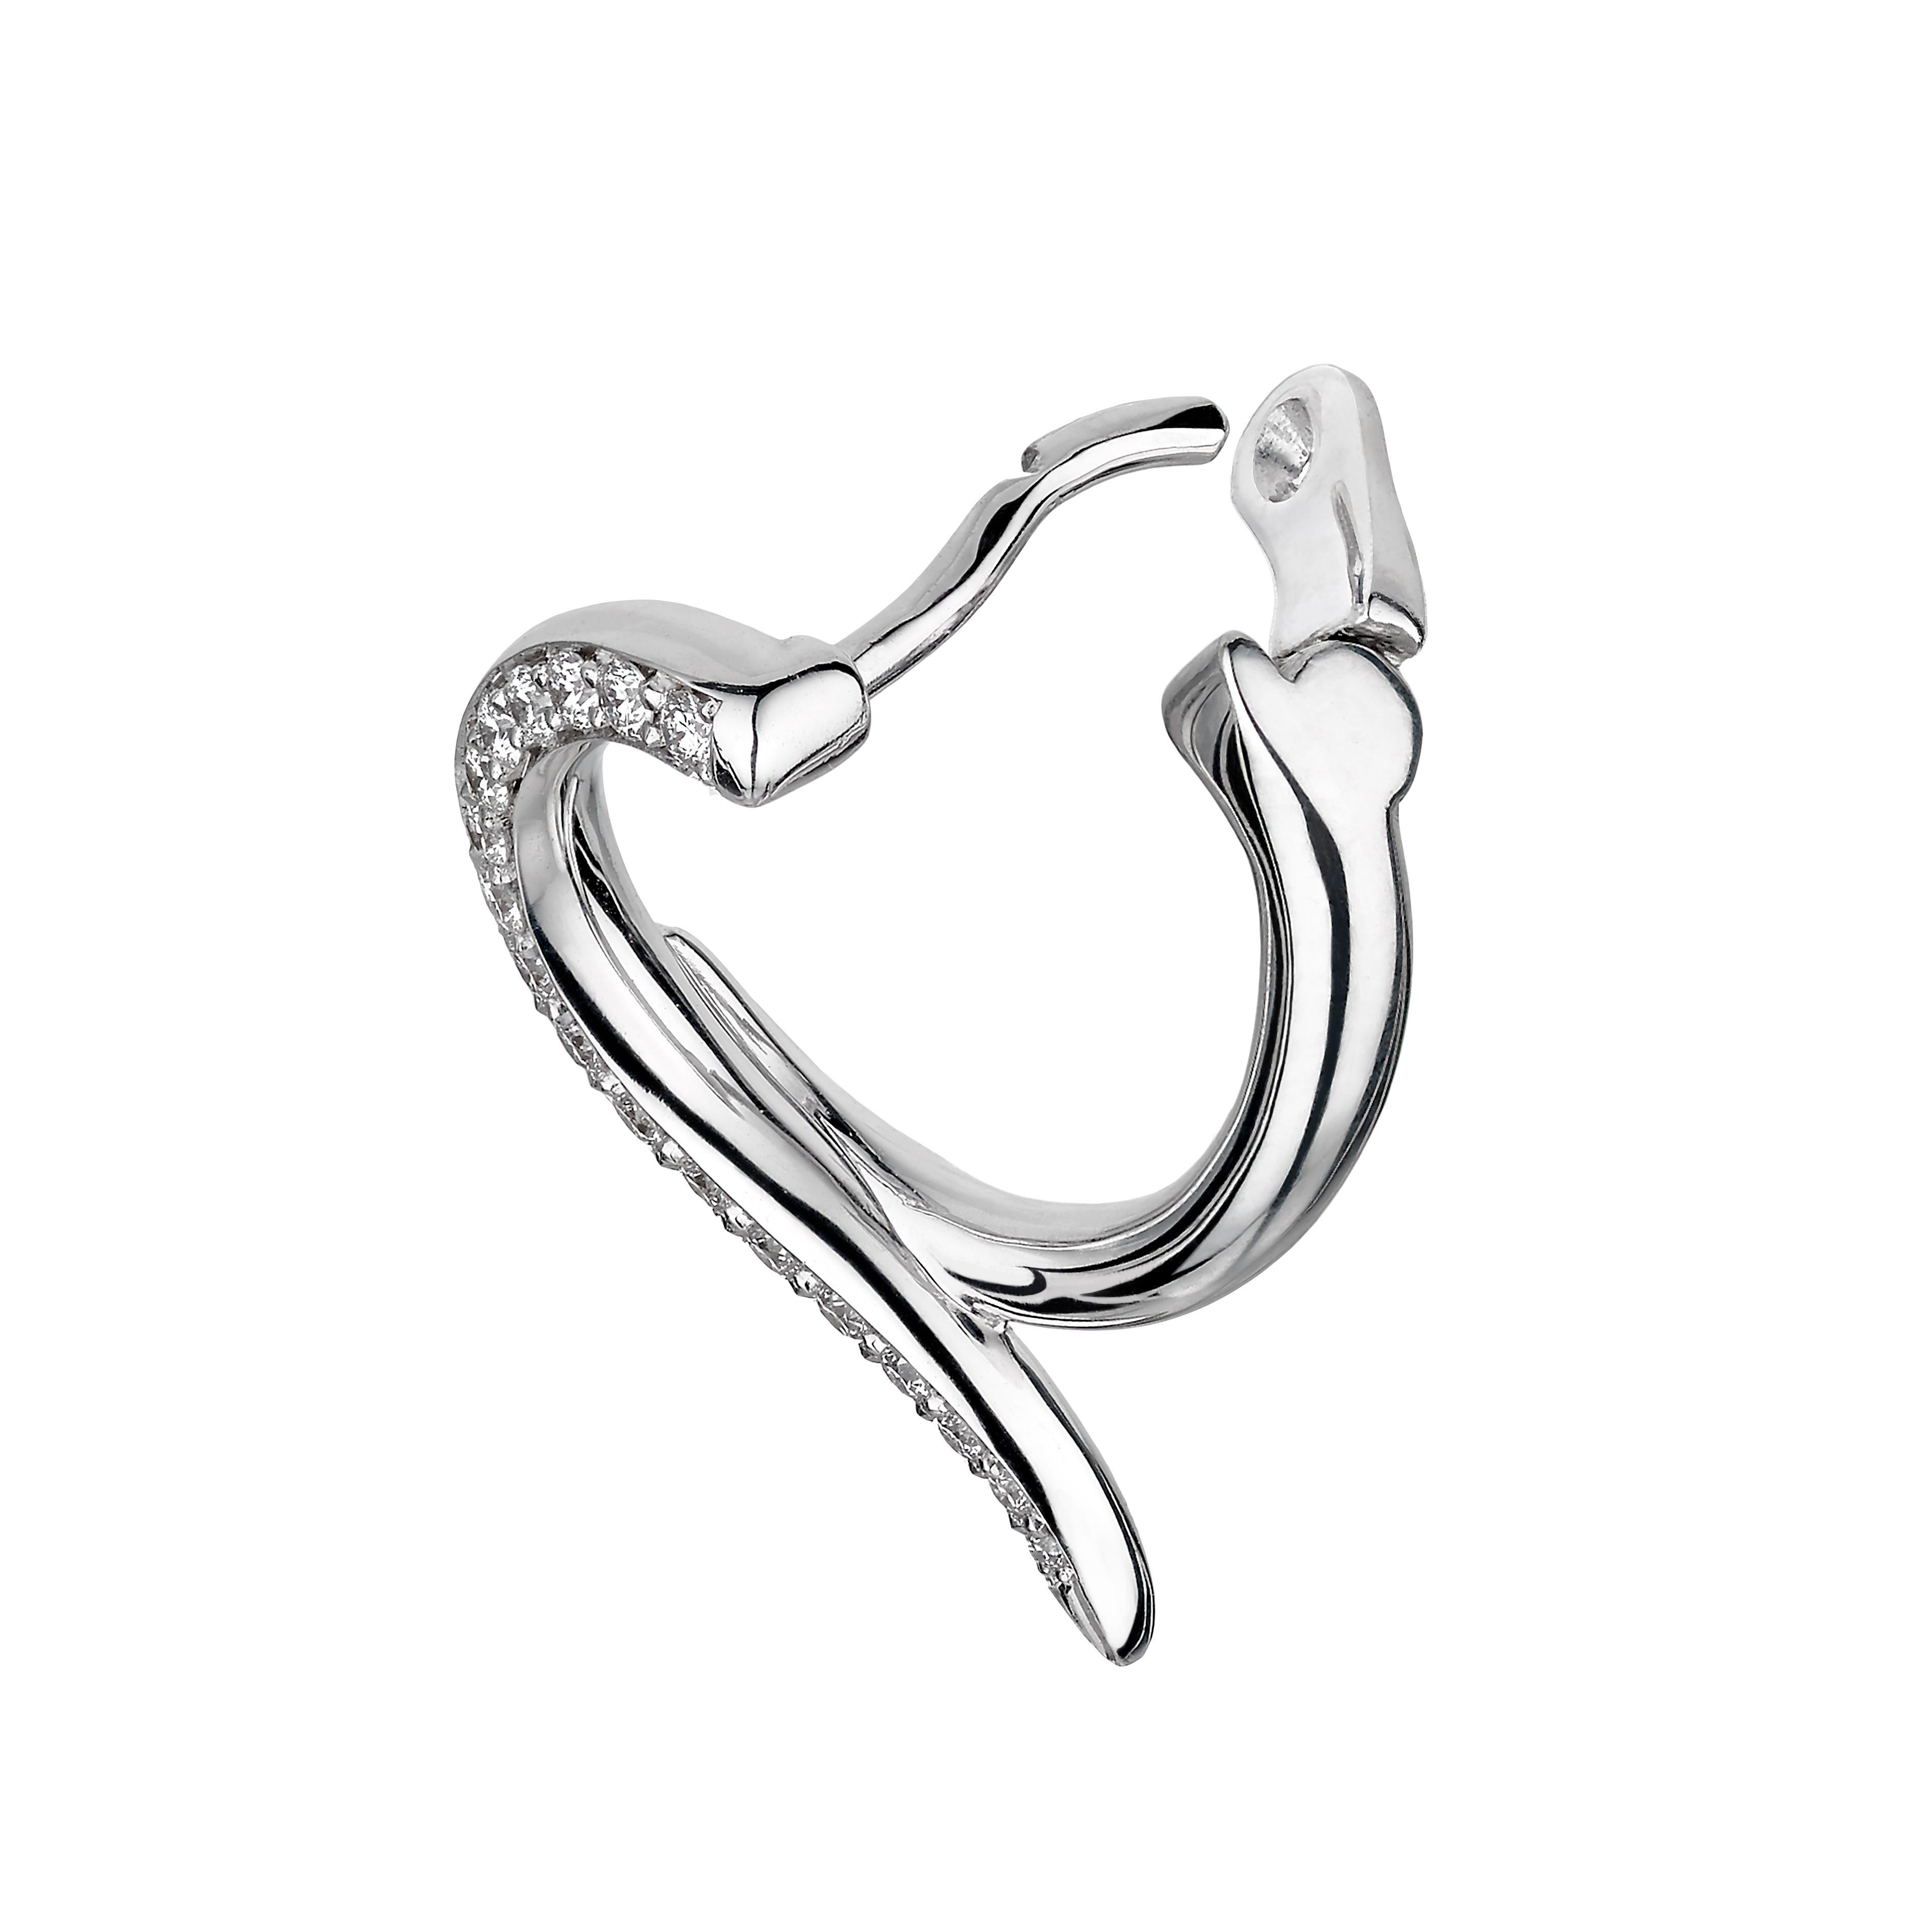 Crafted from 18ct white gold and 0.30cts of brilliant white diamonds, Armis Small Hoop Earrings feature our signature “swept” silhouette - a tapered line that curls to a point. Iridescent diamond pavé curves enclose the ear with a discreet